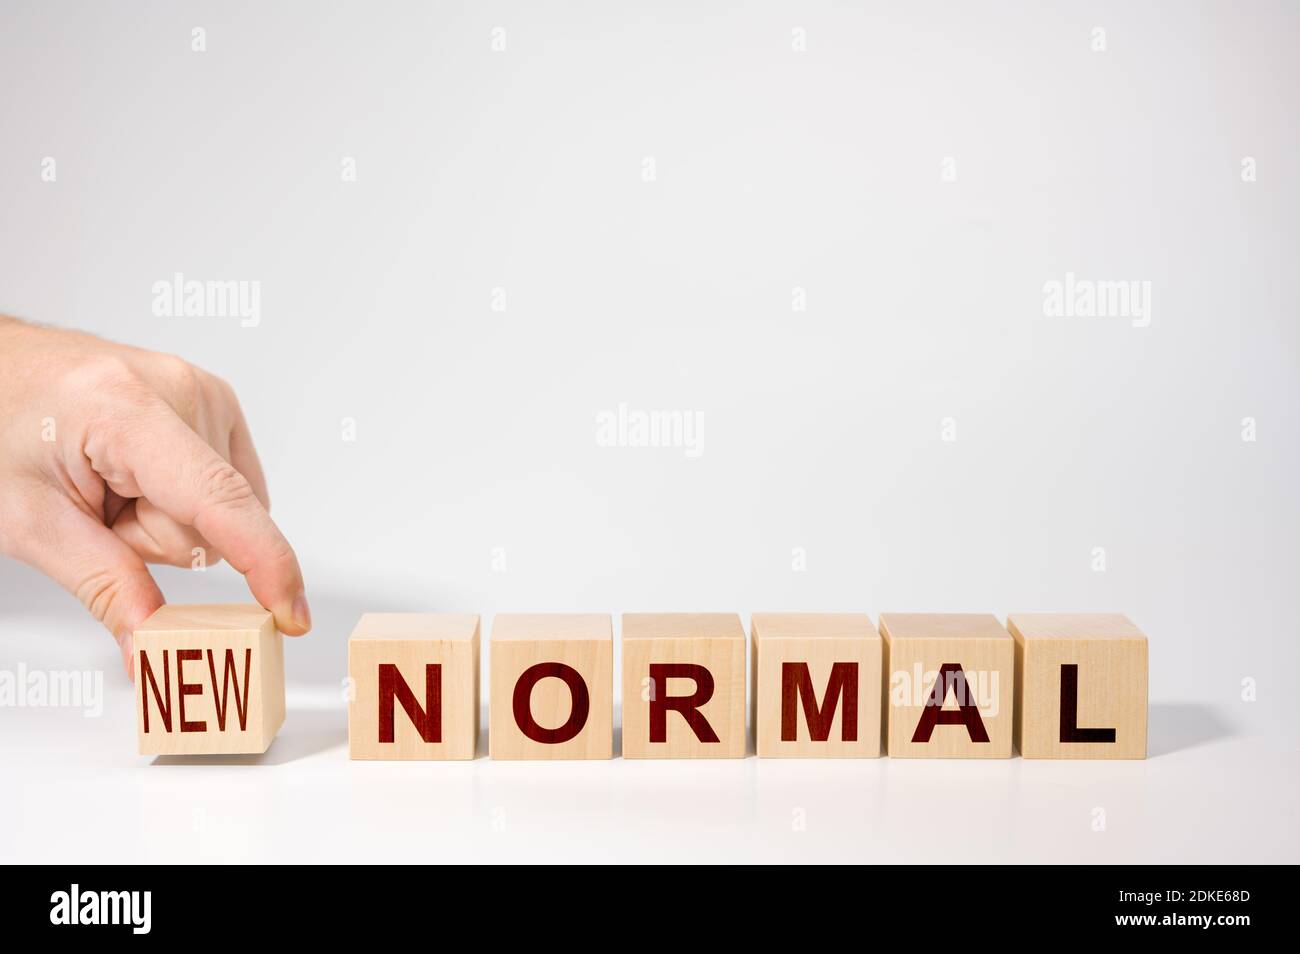 hand arranging wooden cubes with NEW NORMAL word. Adapting to new life or business post-lockdown coronavirus pandemic. Business with social distancing Stock Photo